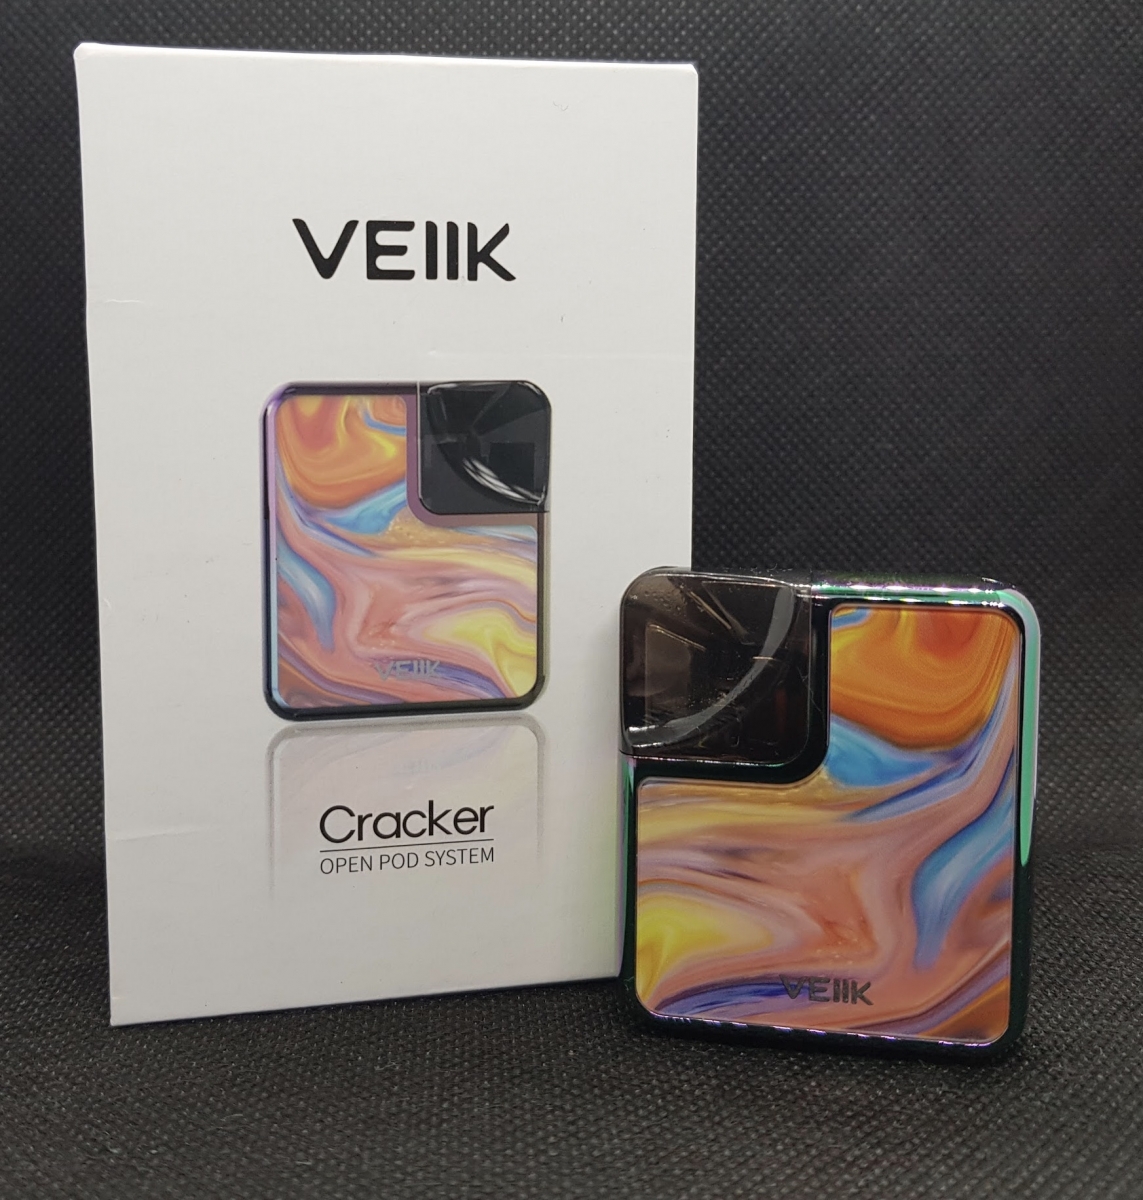 Veiik Cracker open pod system with box